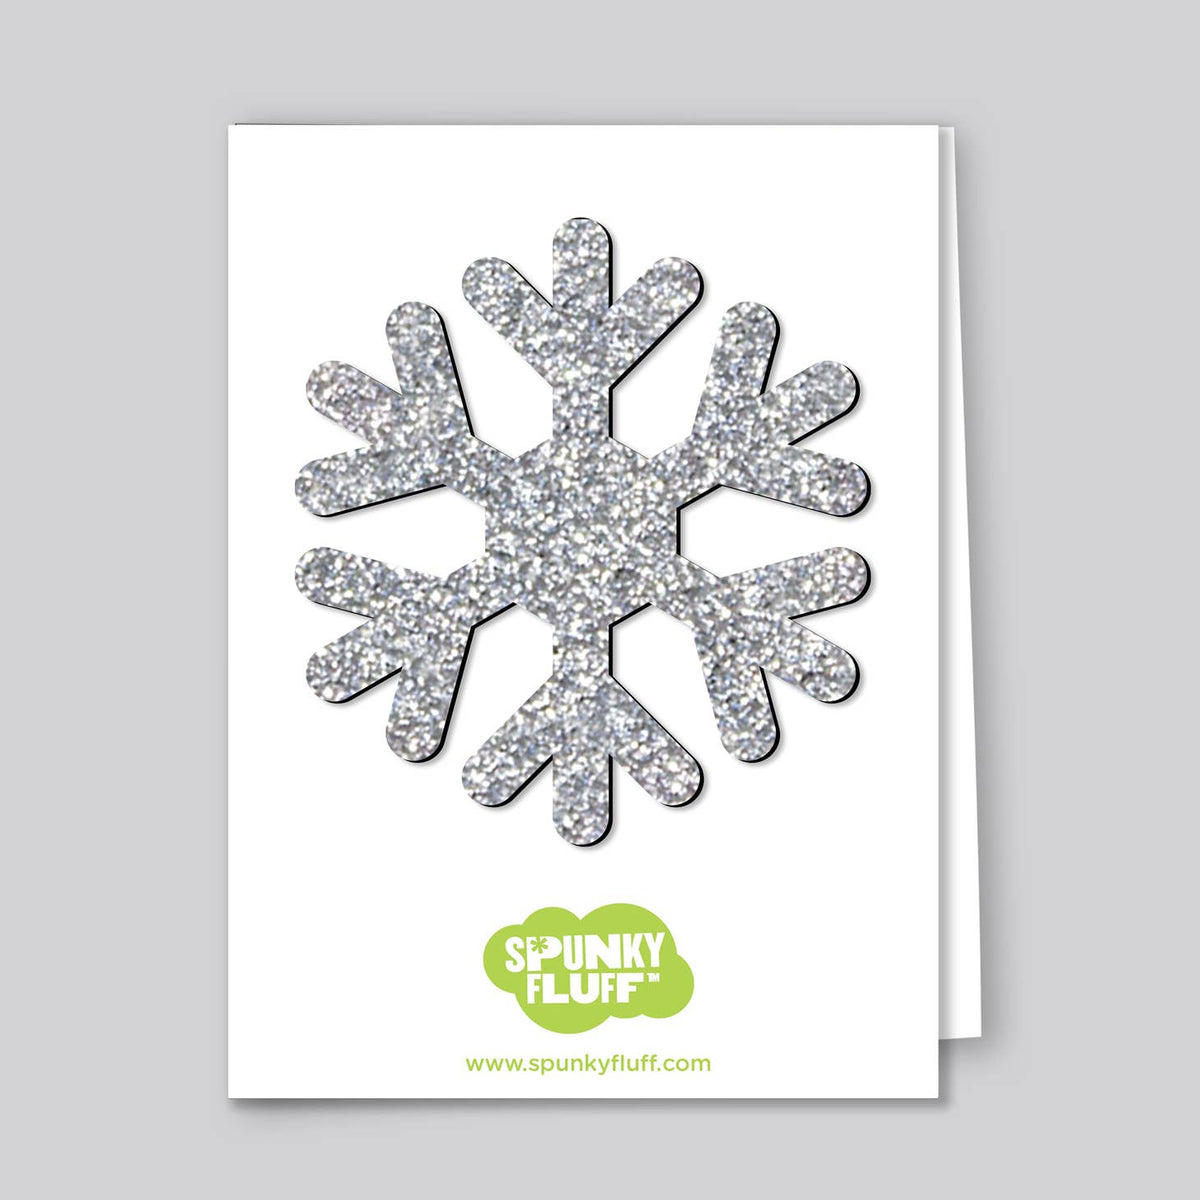 Limited-Edition Snowflake Magnets